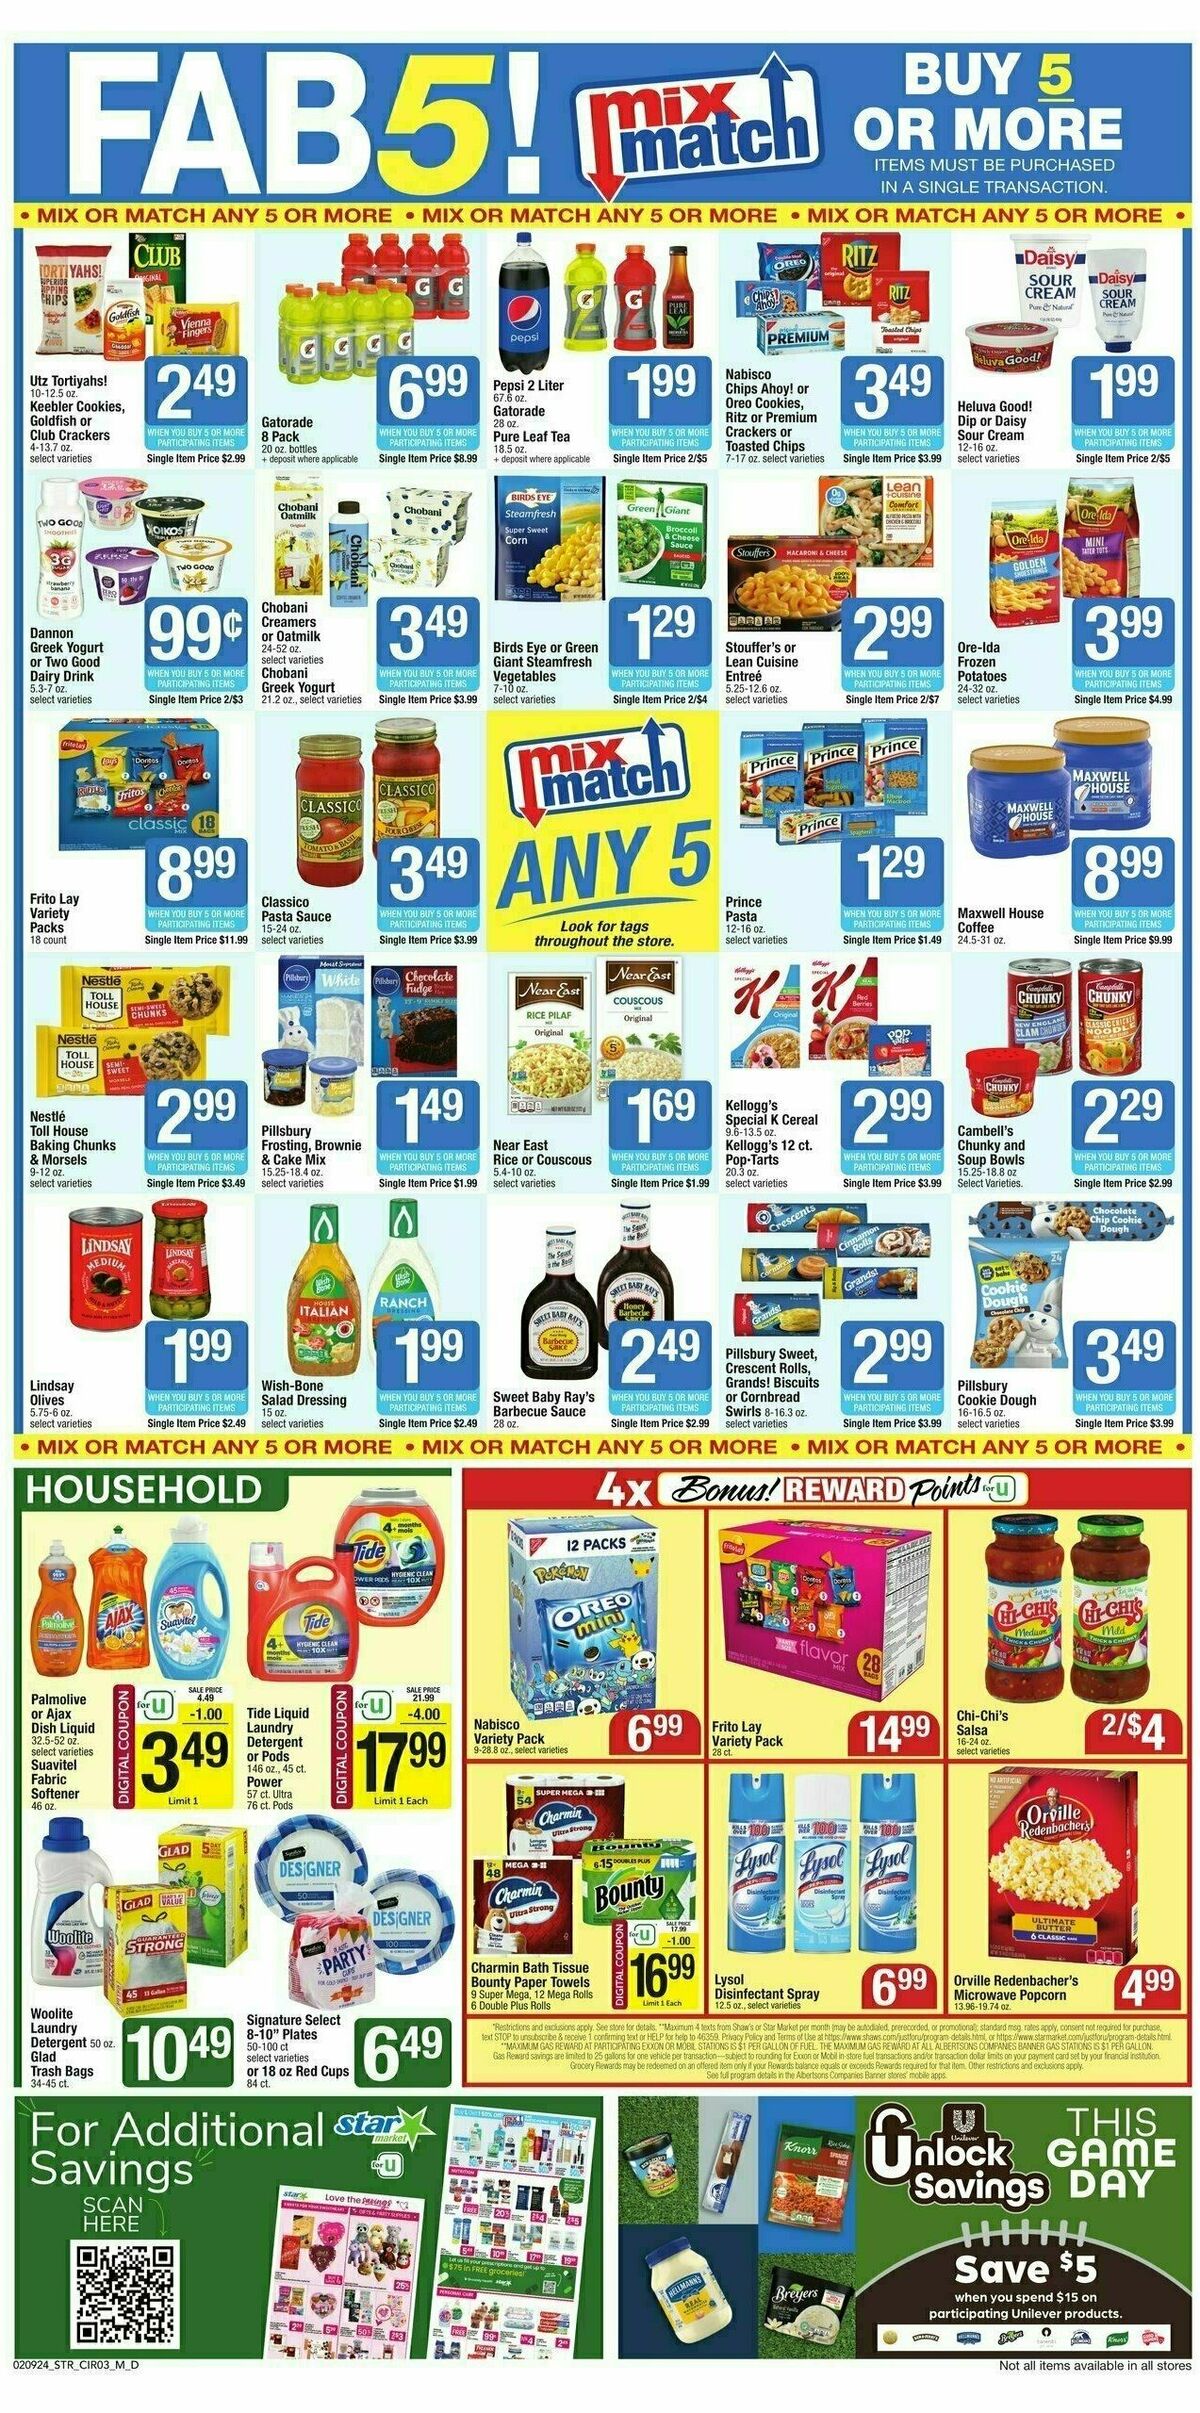 Star Market Weekly Ad from February 9